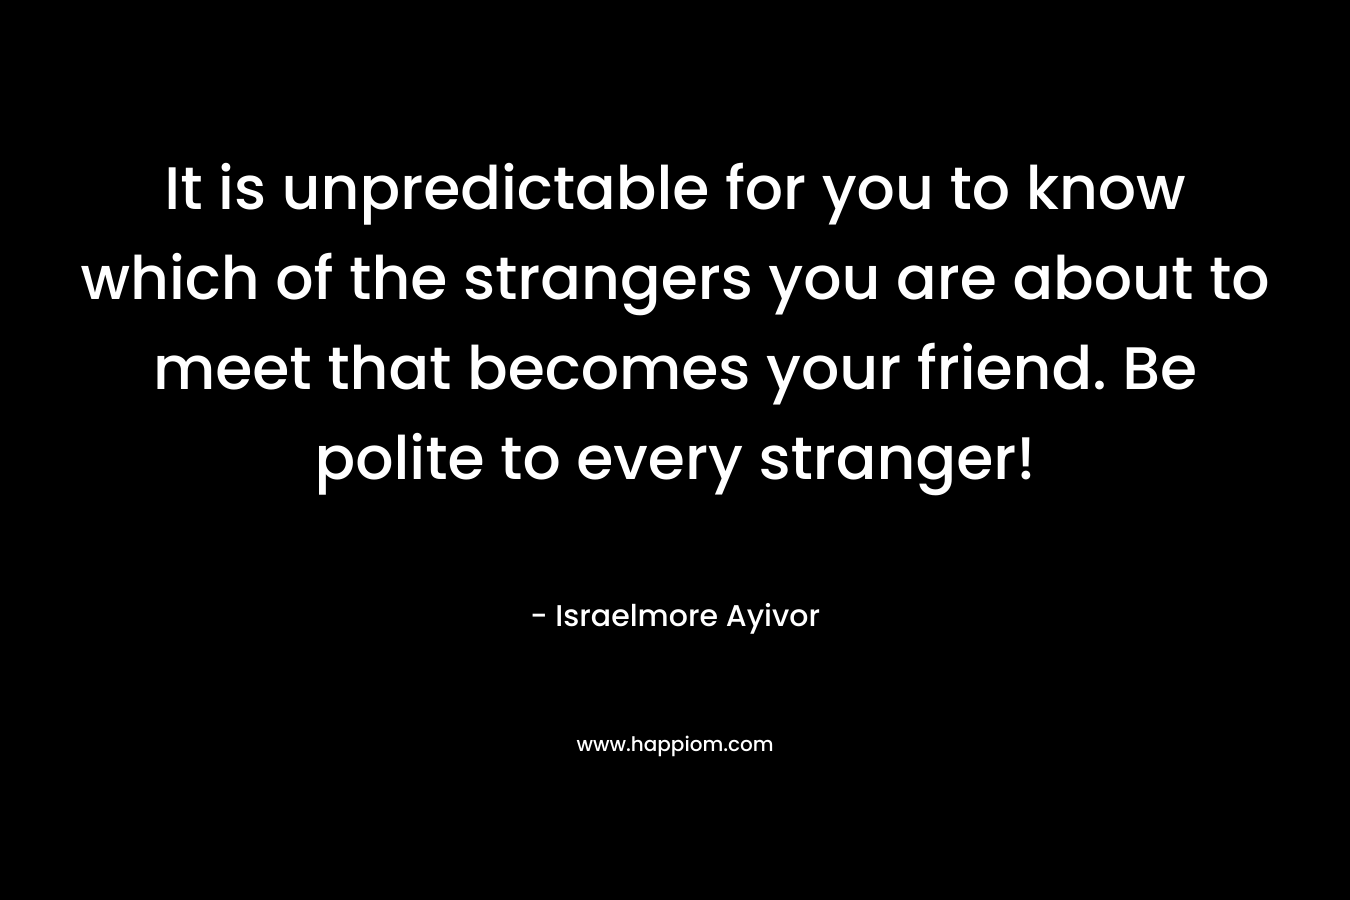 It is unpredictable for you to know which of the strangers you are about to meet that becomes your friend. Be polite to every stranger!